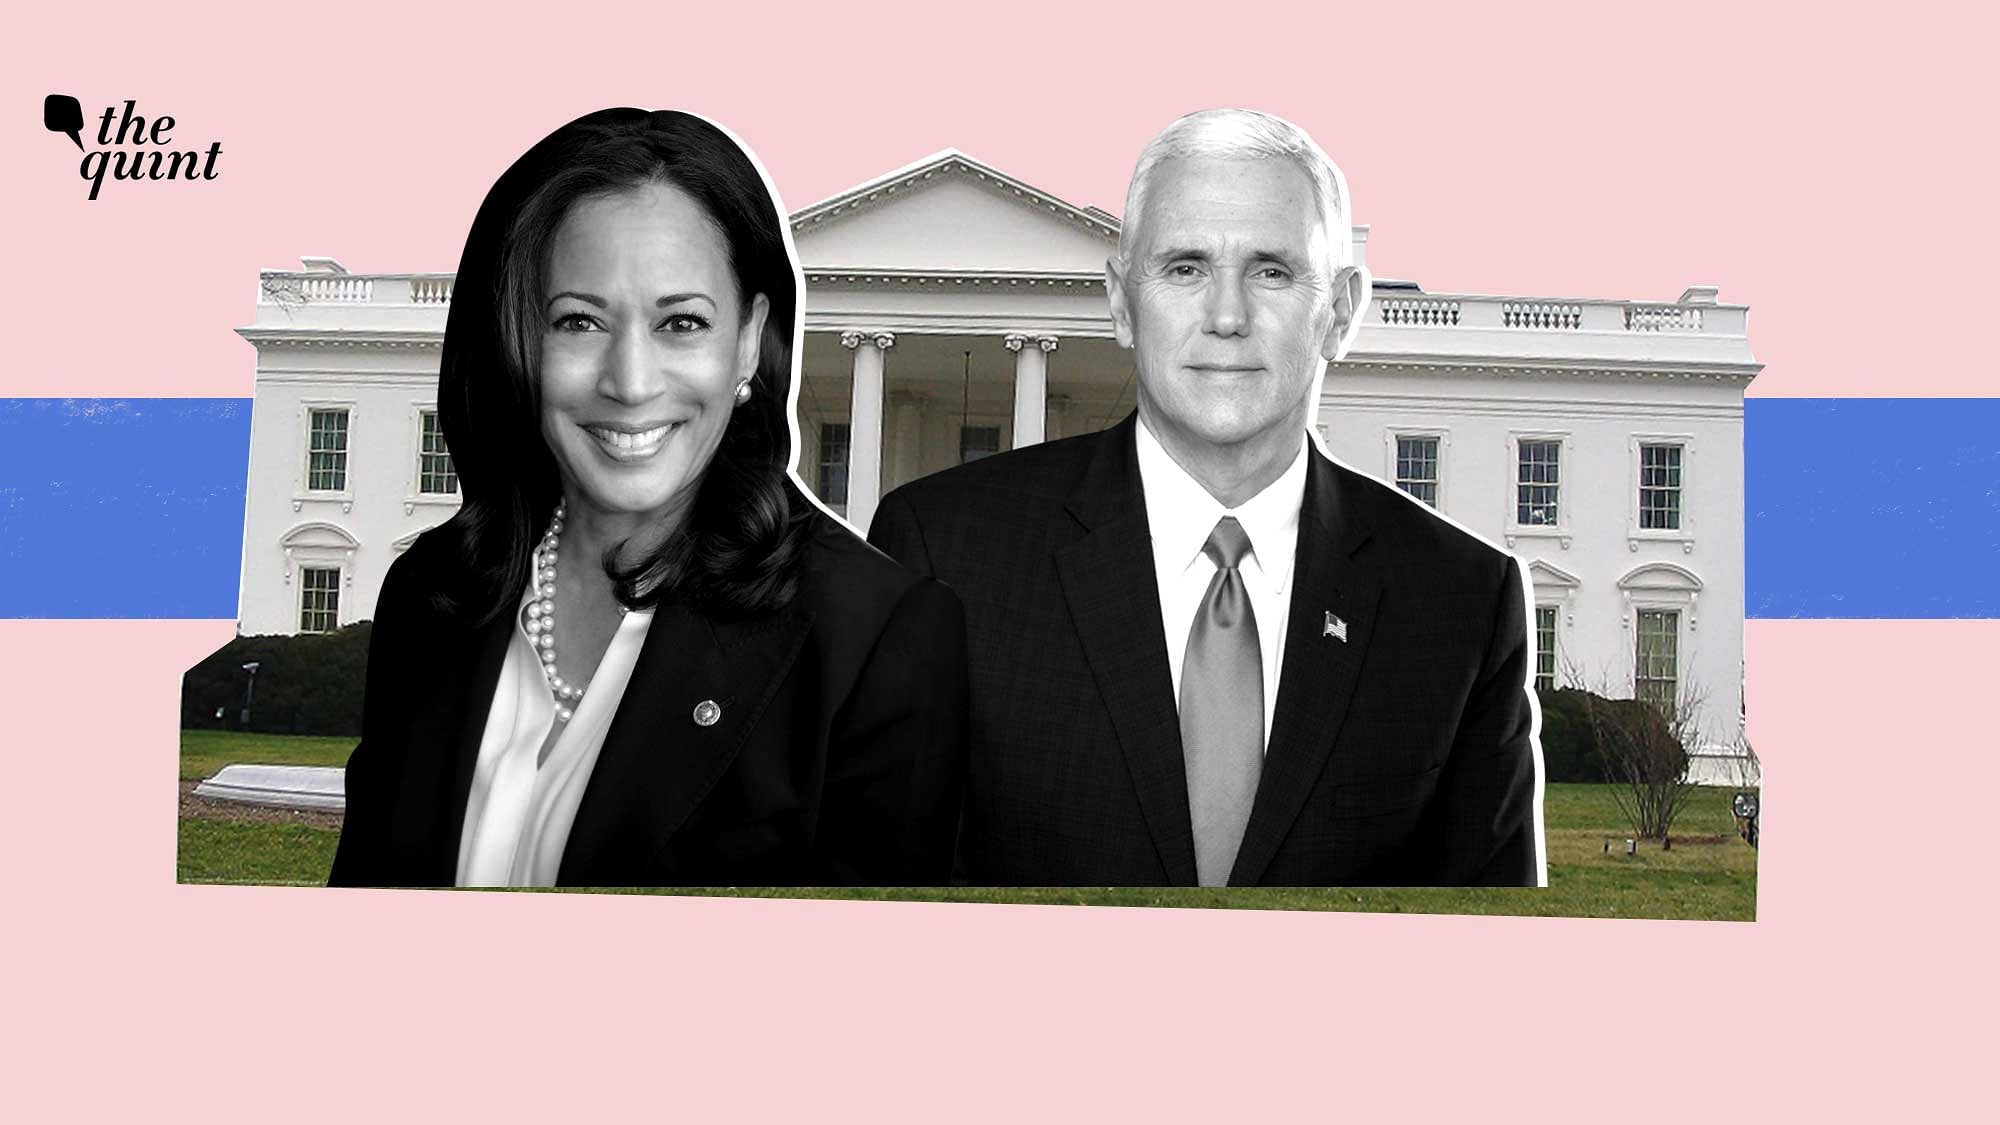 Harris and Pence to face-off in historic debate tonight. 